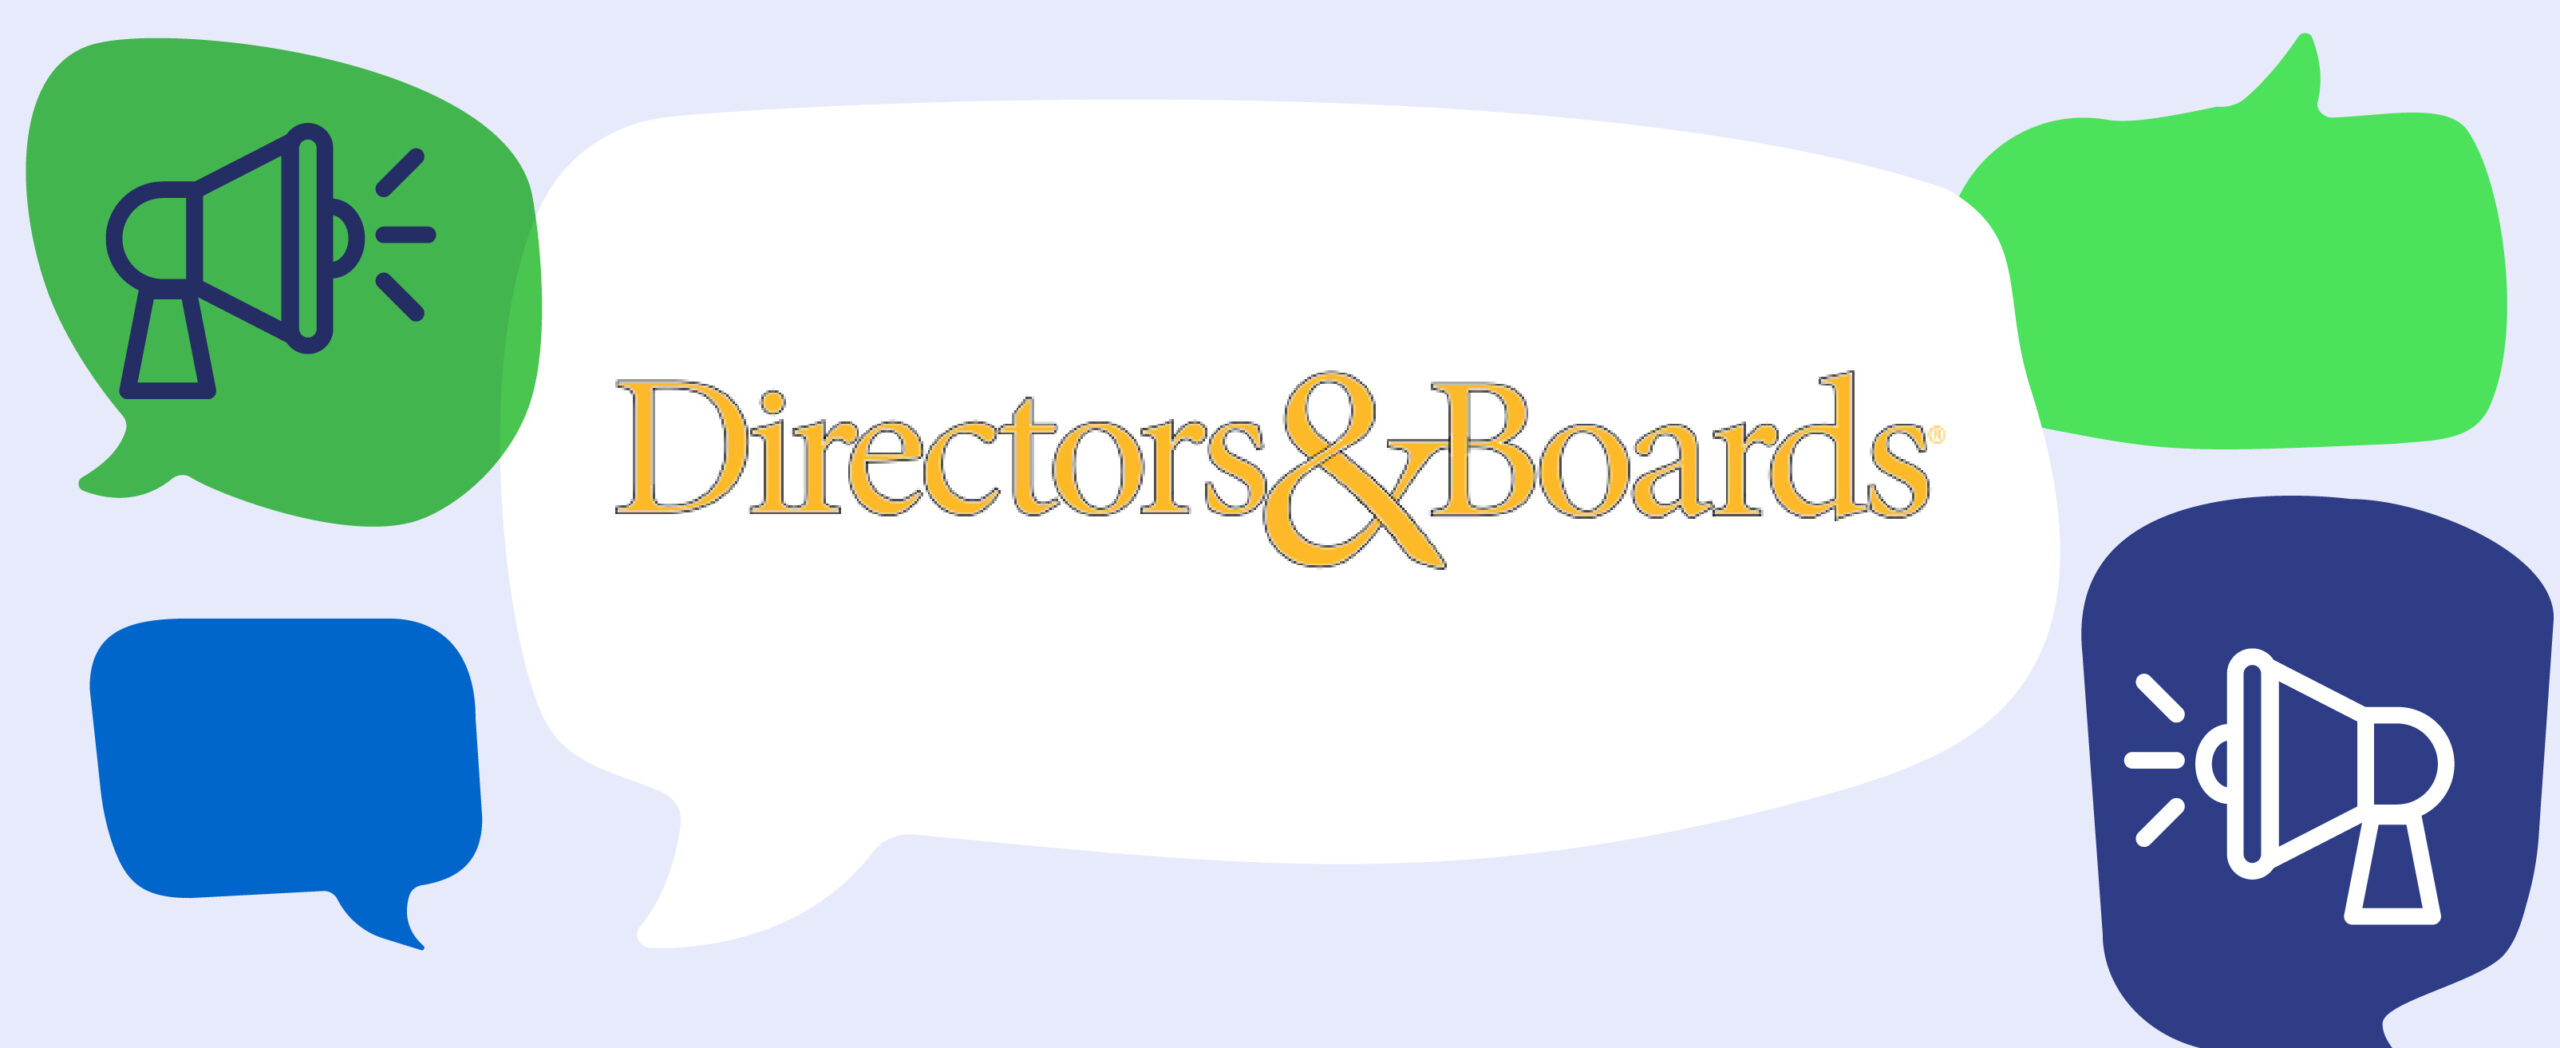 Directors & Boards: Character of the Corporation: Human Capital Governance